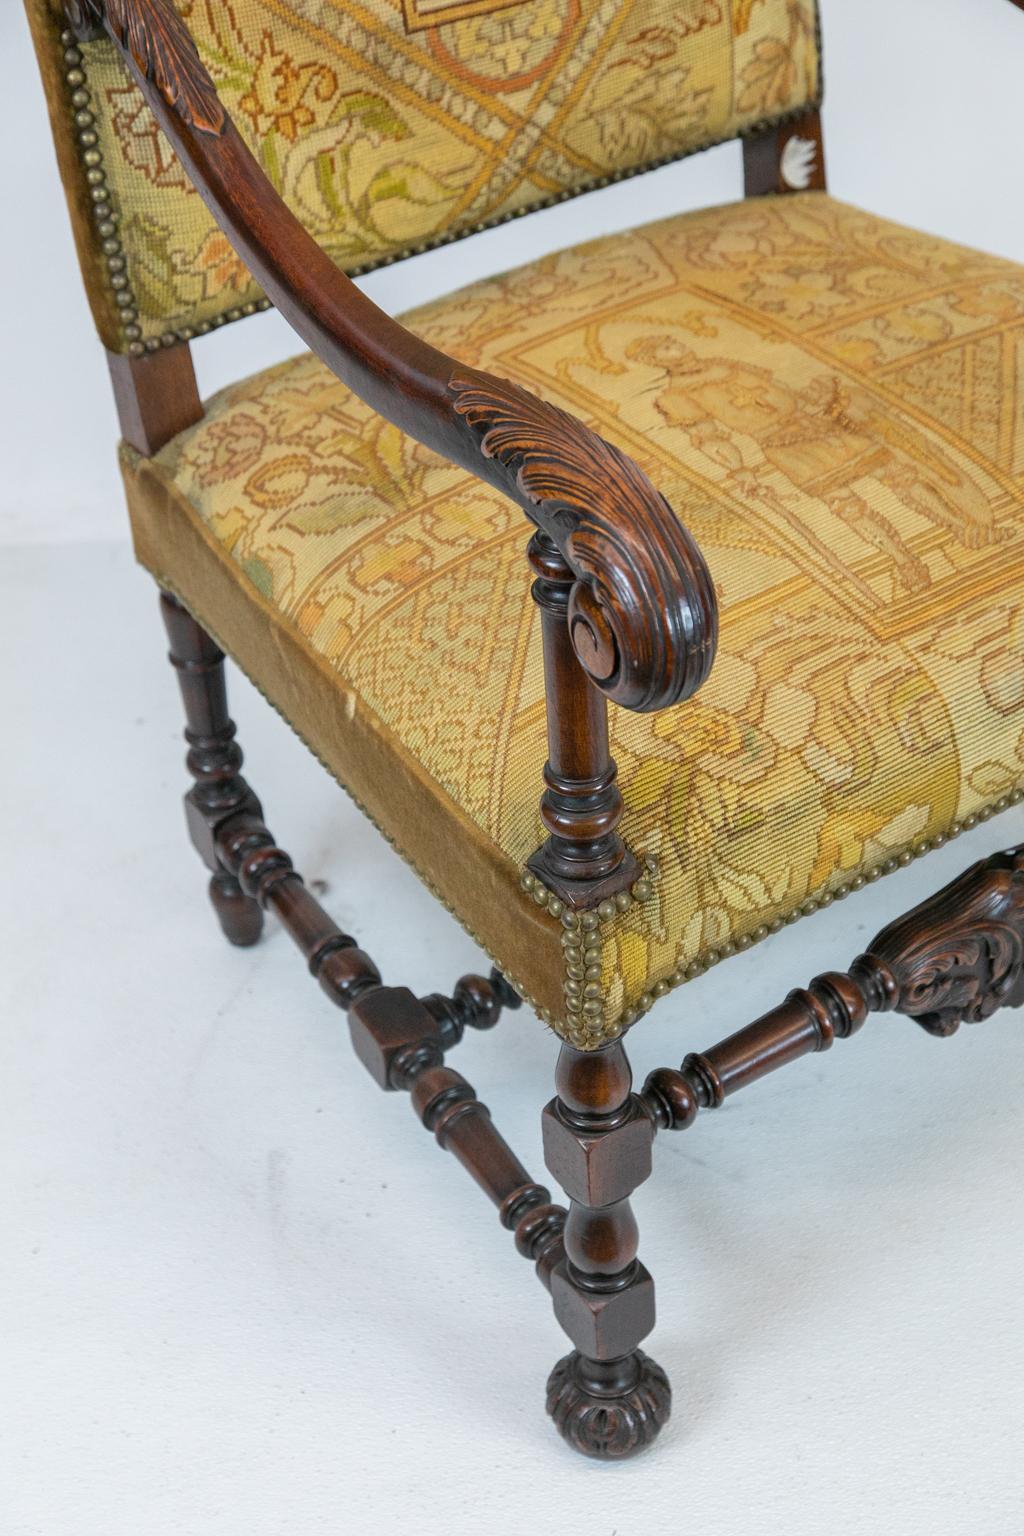 English walnut carved needlework armchair, the back and seat stitched with birds, dogs, and deer. The center panels are stitched with holy warriors done in petit point. The arms are carved with acanthus leaves and the base has a double cross